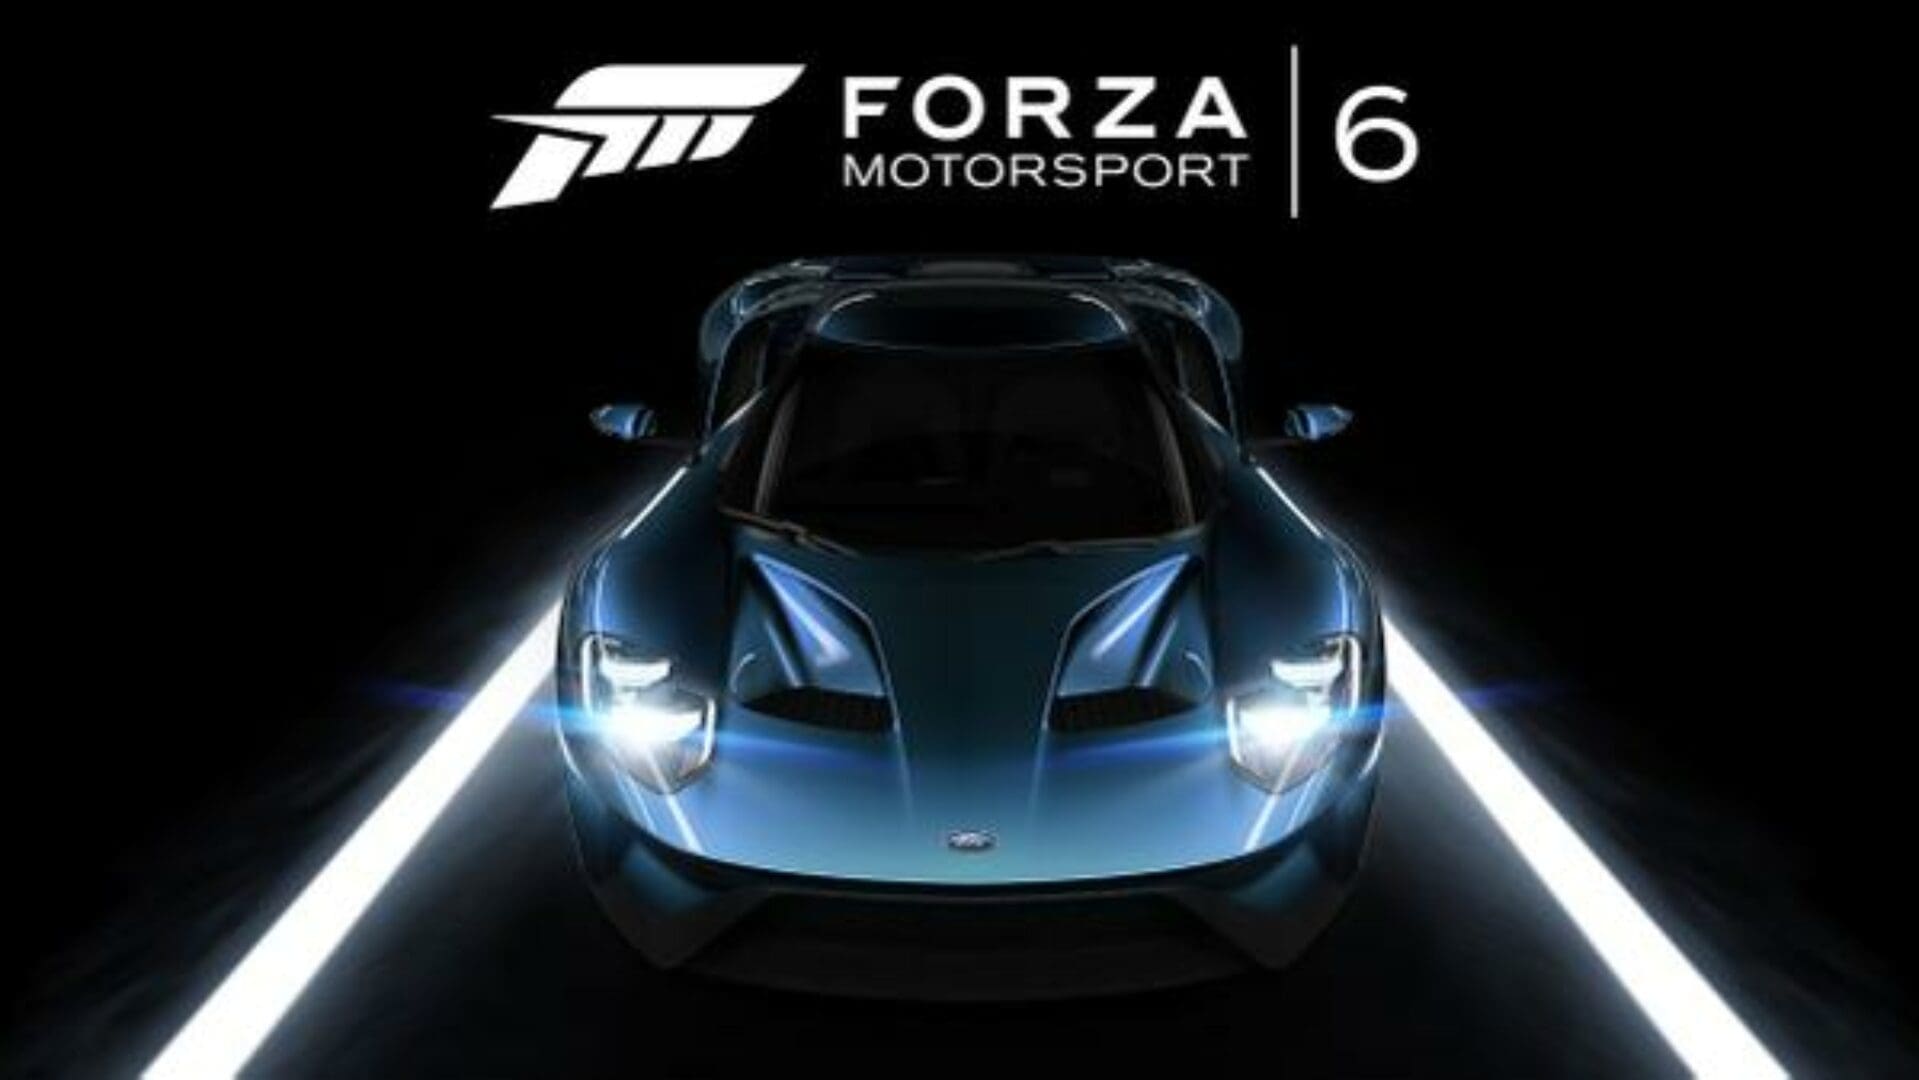 Forza Motorsport 6 Coming to Xbox One